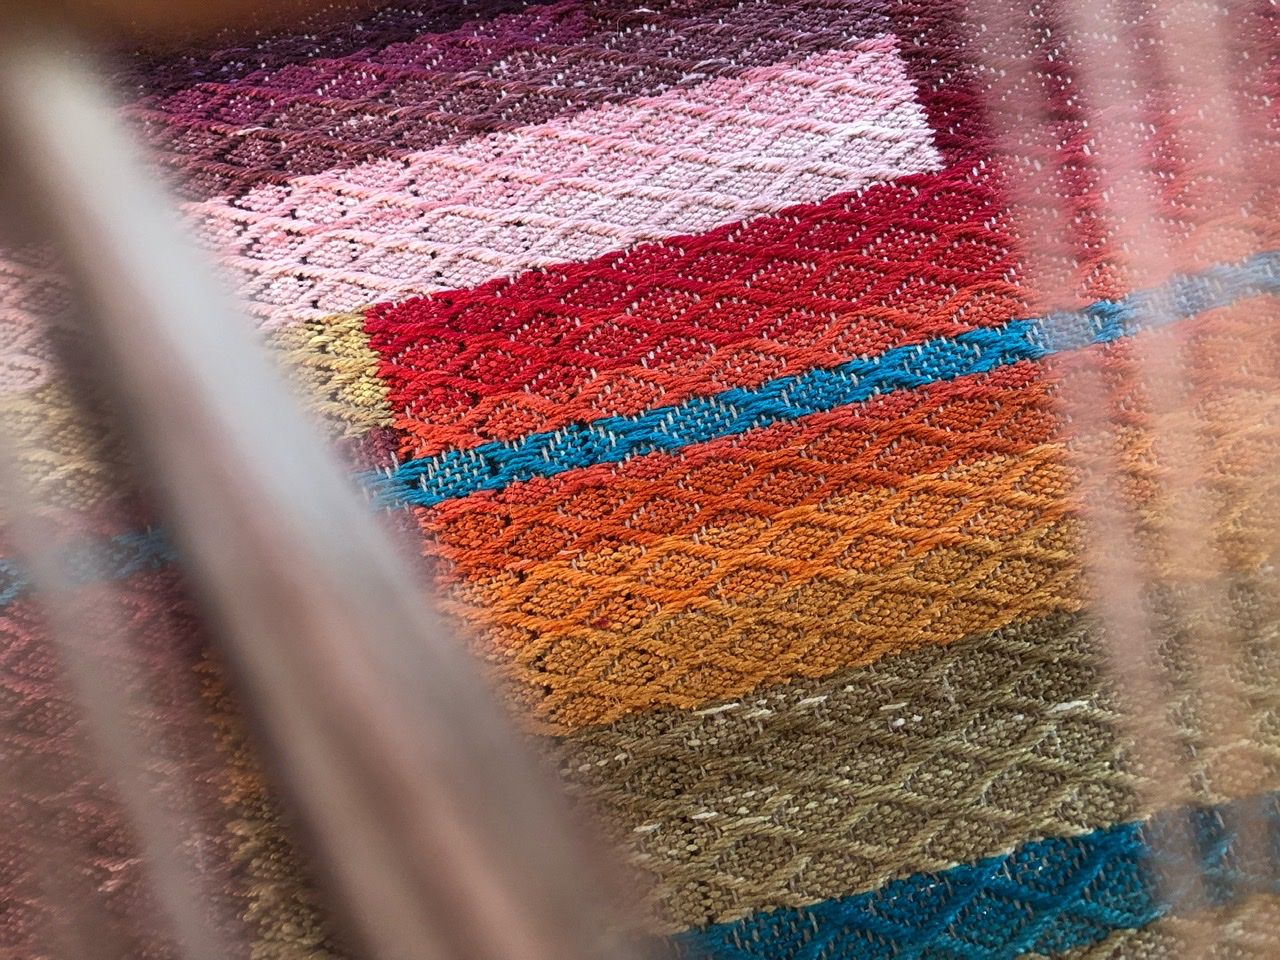 An up close image looking through the threads of a loom at a blocky, rainbow colored diamond pattern weaving 